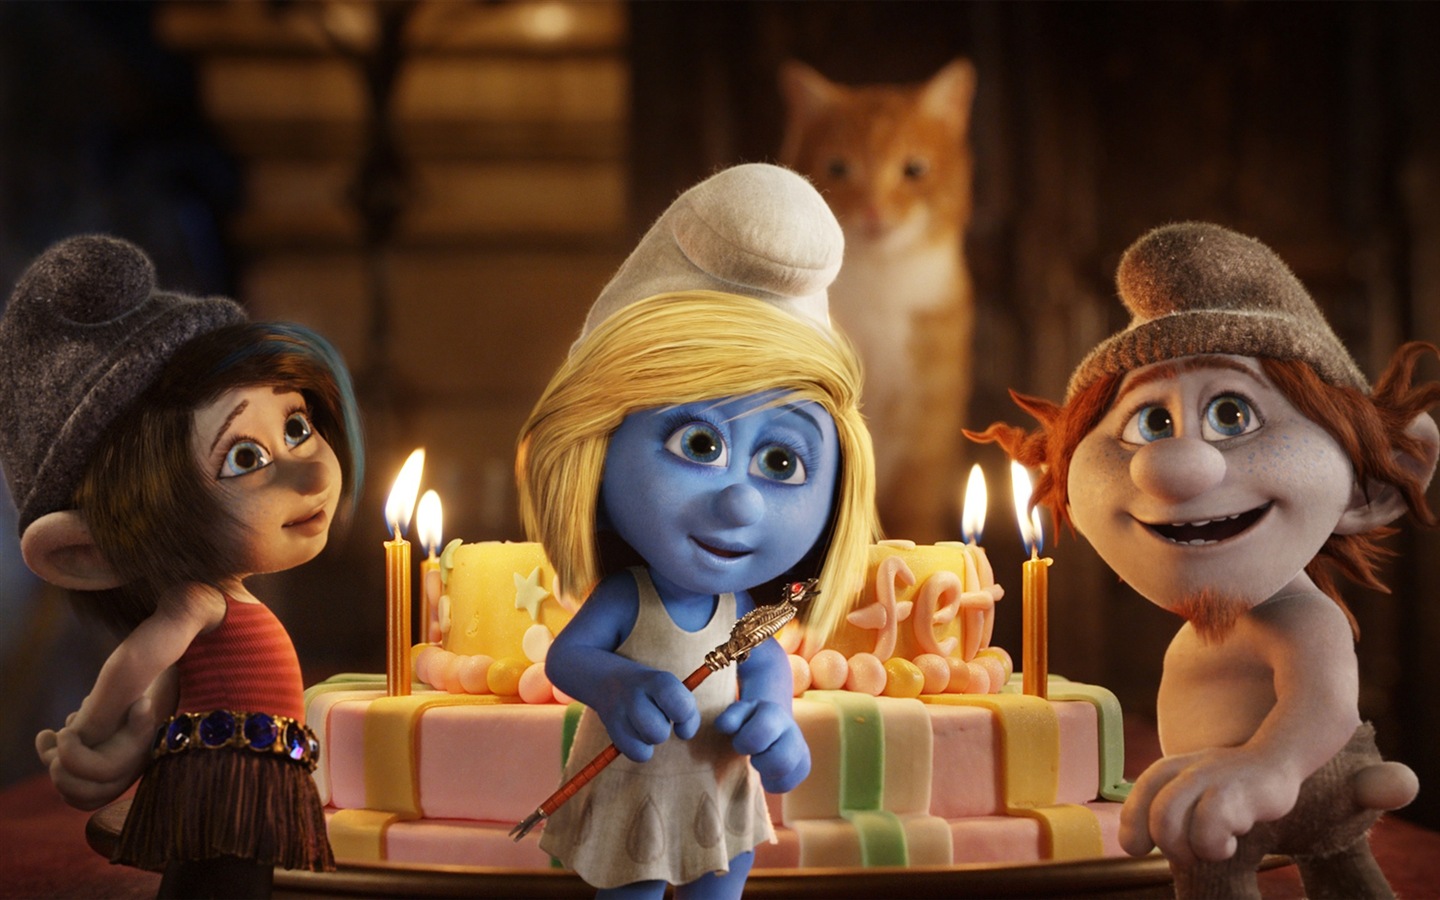 The Smurfs 2 HD movie wallpapers #2 - 1440x900